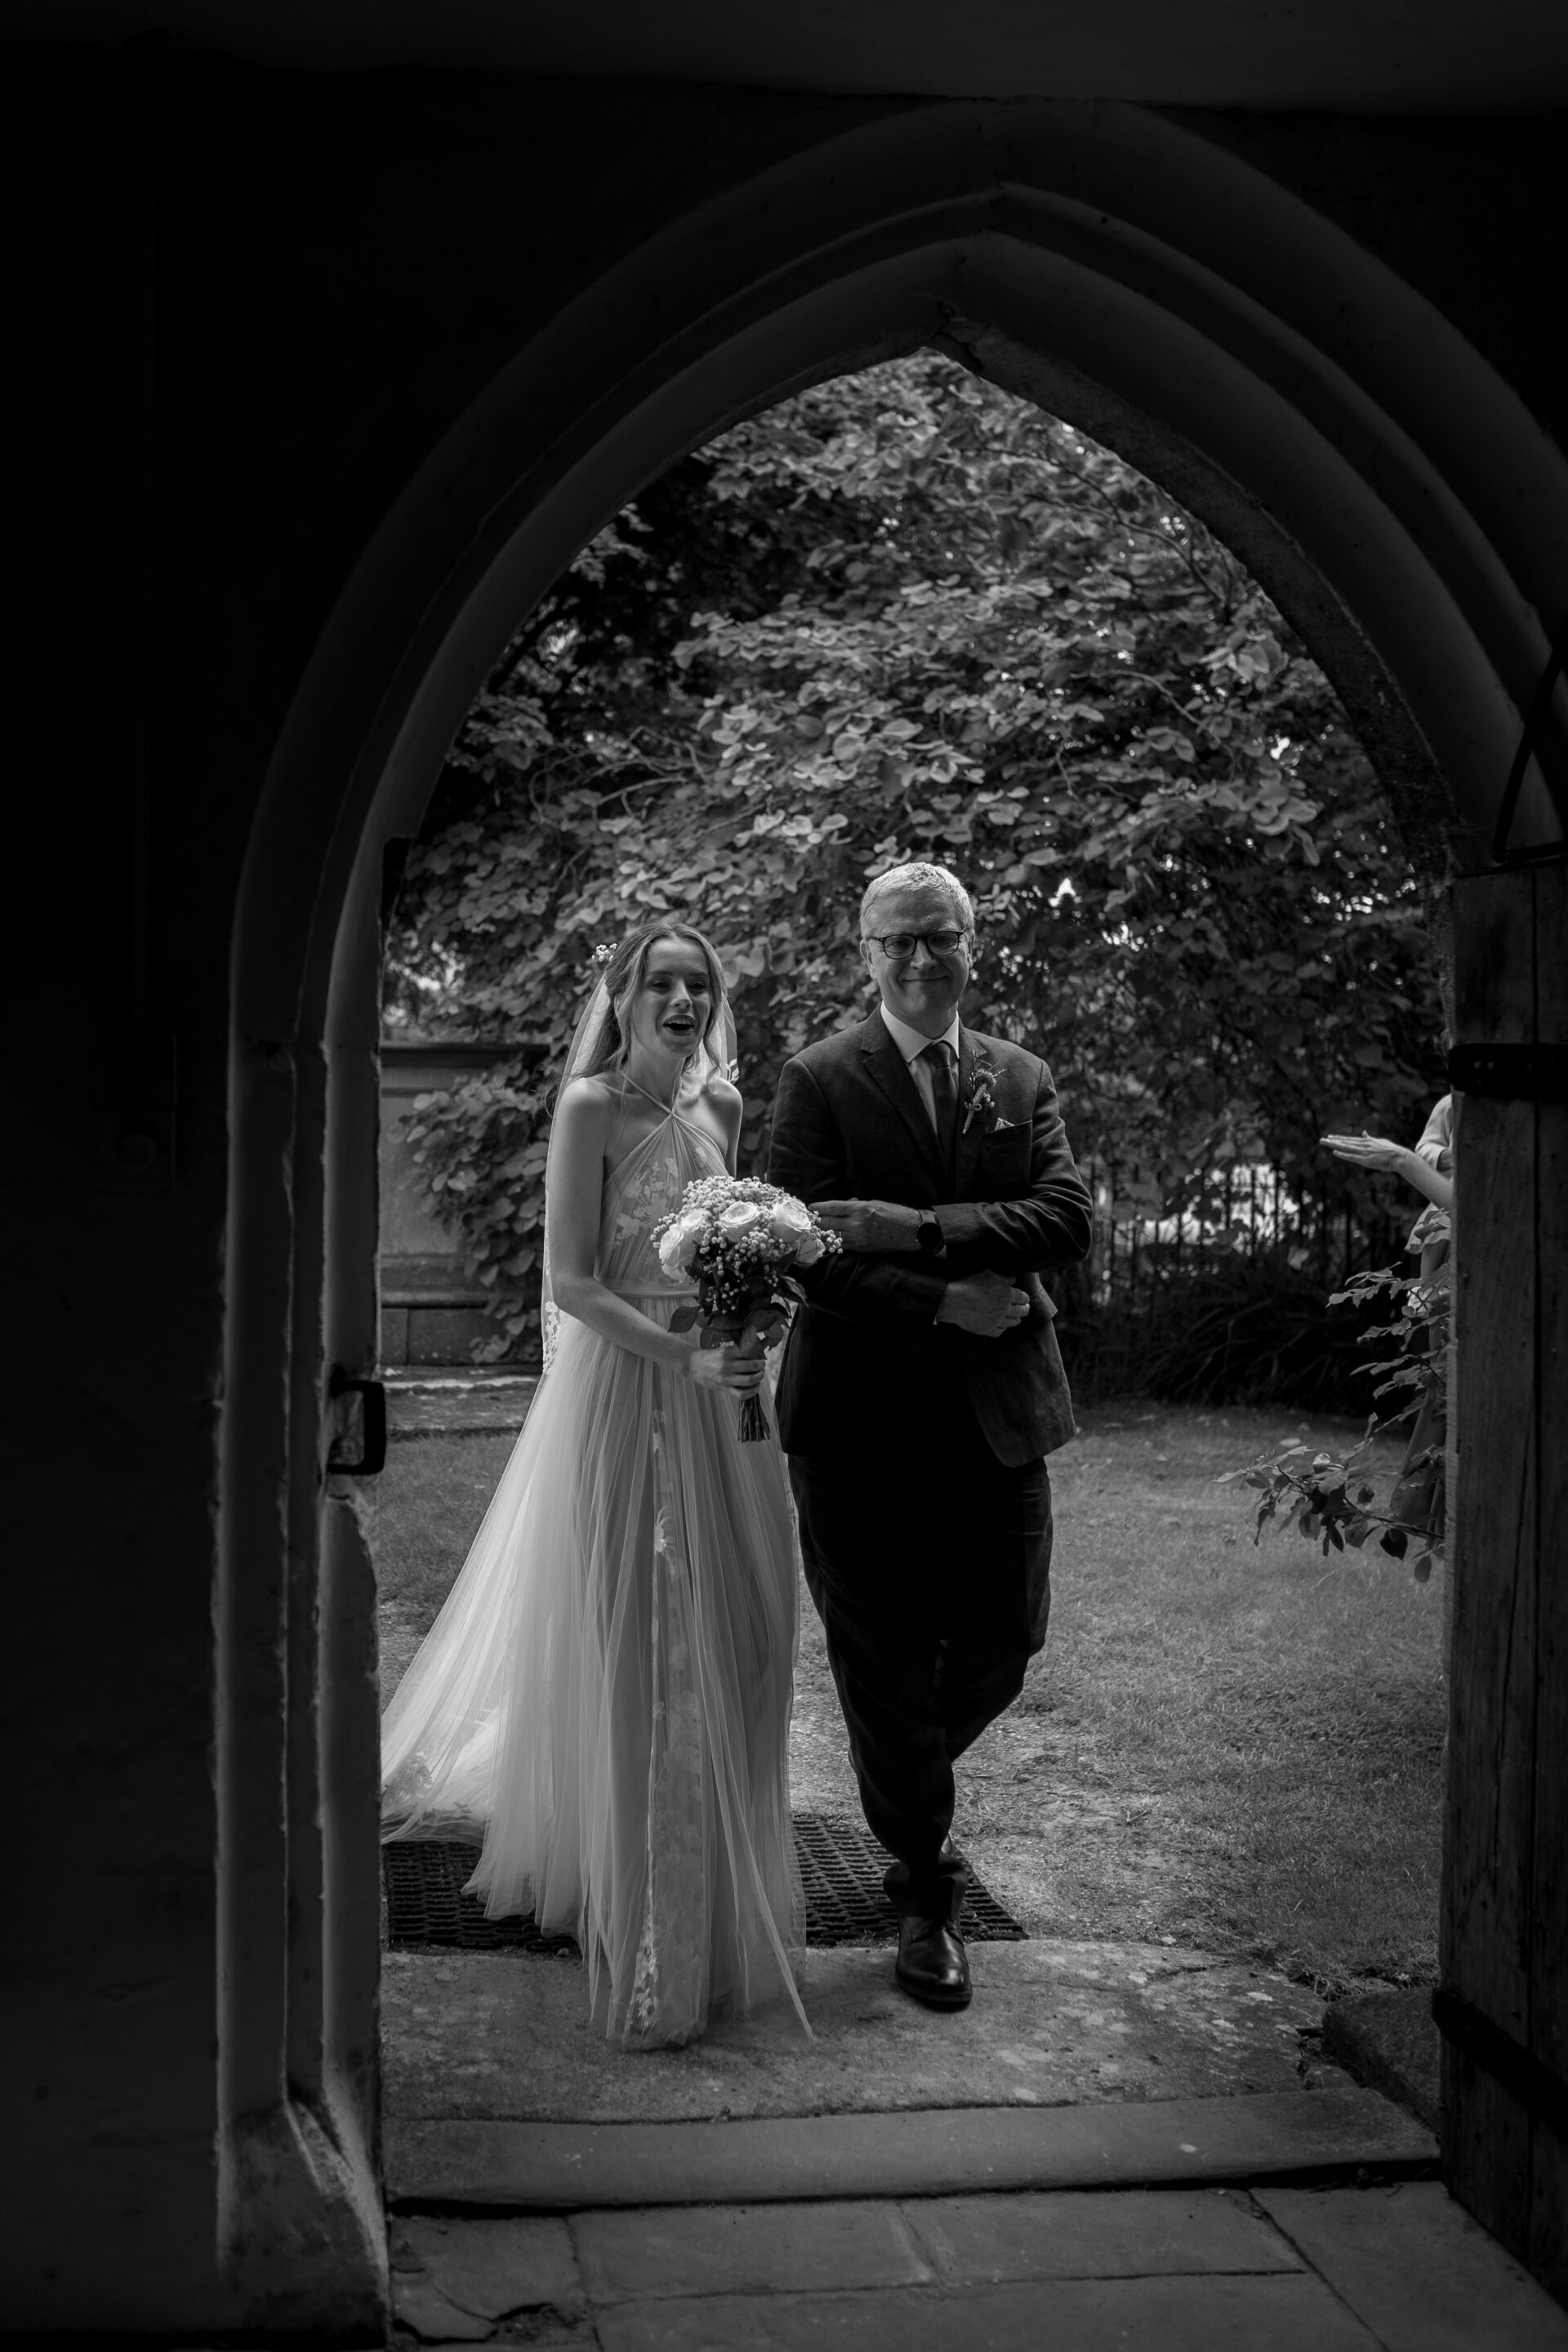 The bride arrives for her church ceremony at her Gloucestershire wedding